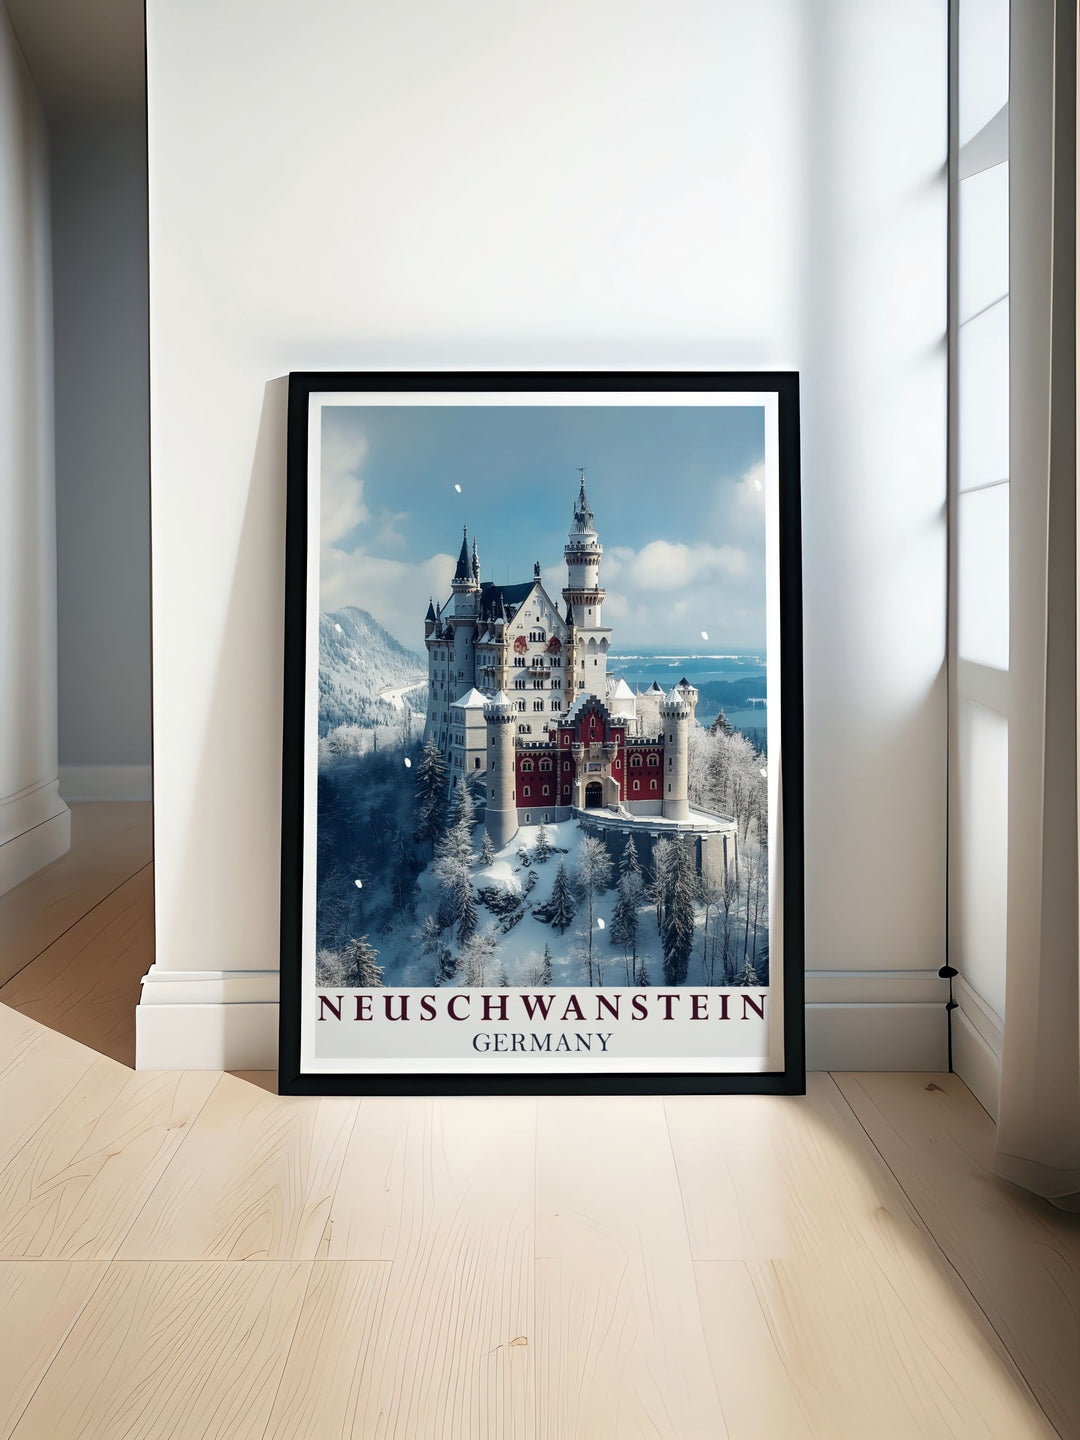 Beautiful Neuschwanstein Castle travel poster capturing the enchanting architecture and timeless beauty of this iconic castle. Ideal for home decor, this fine line print adds elegance to any space.